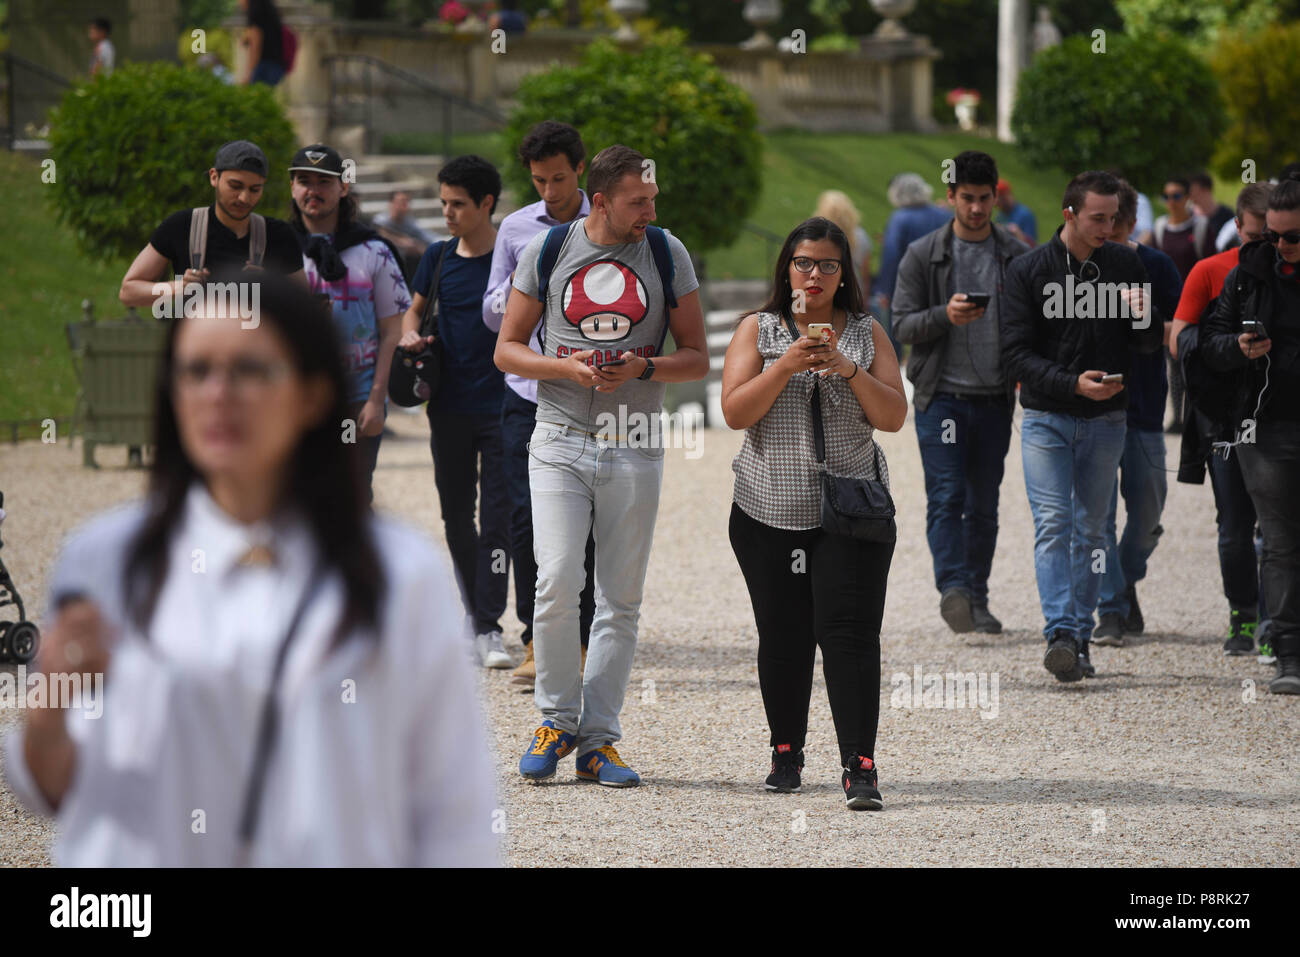 July 14, 2016 - Paris, France: Youths take part in a mass Pokemon hunt in the Luxembourg Garden in central Paris. Hundreds of players of the new Pokemon Go game showed up to take part in a massive hunt despite the authorities' attempt to cancel the event. Despite playing mostly solo, the Pokemon Go users enjoyed to interact and meet other players. Millions of users have already downloaded the game, which requires users to catch on-screen pokemon characters using their real-world location.  Des jeunes participent a une chasse au Pokemons dans le jardin du Luxembourg avec l'application Pokemon G Stock Photo